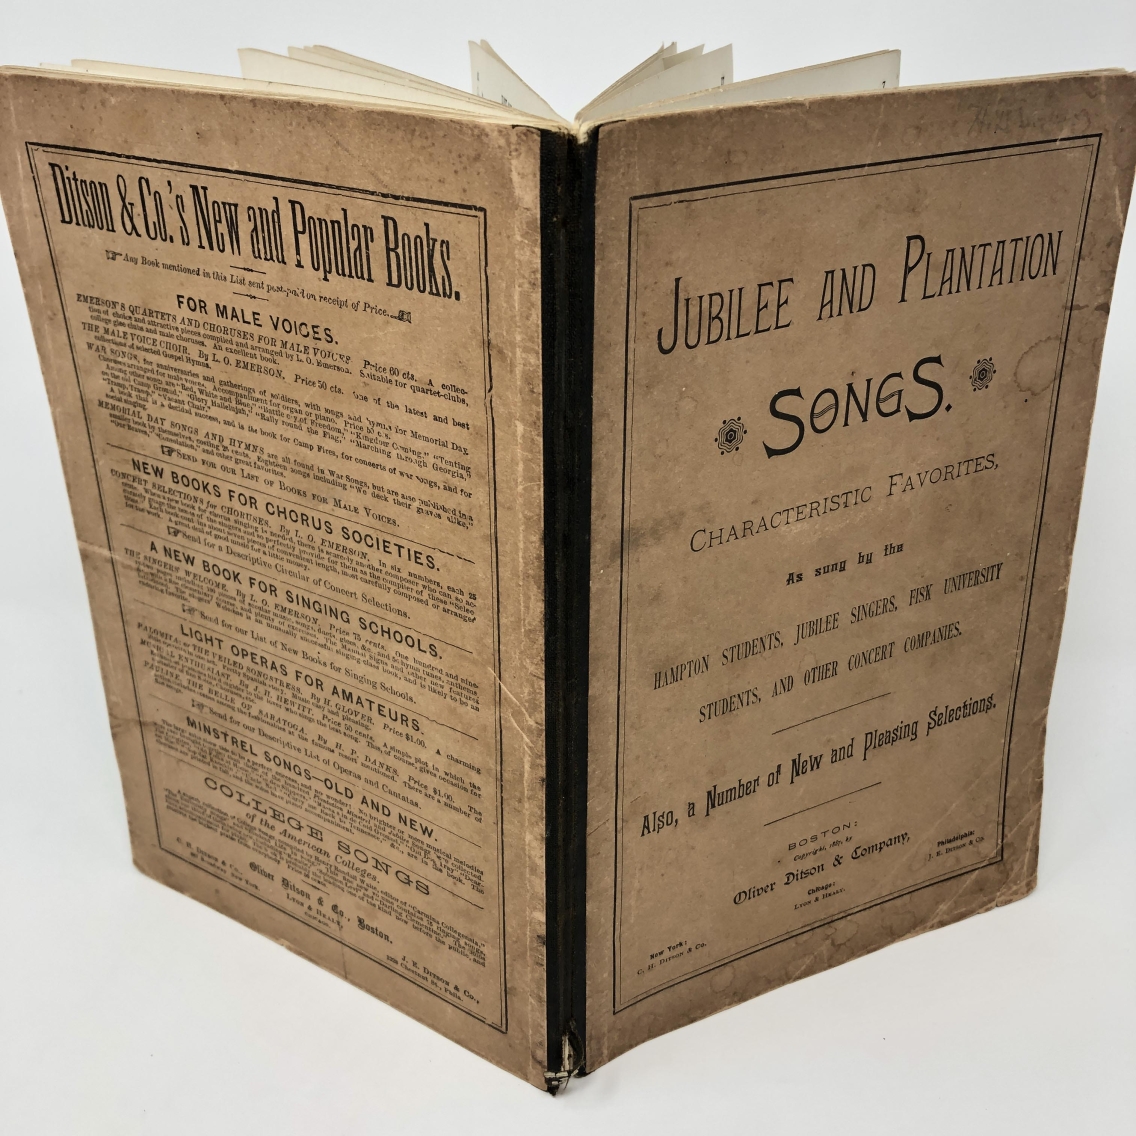 Cover of Jubilee and Plantations Songs